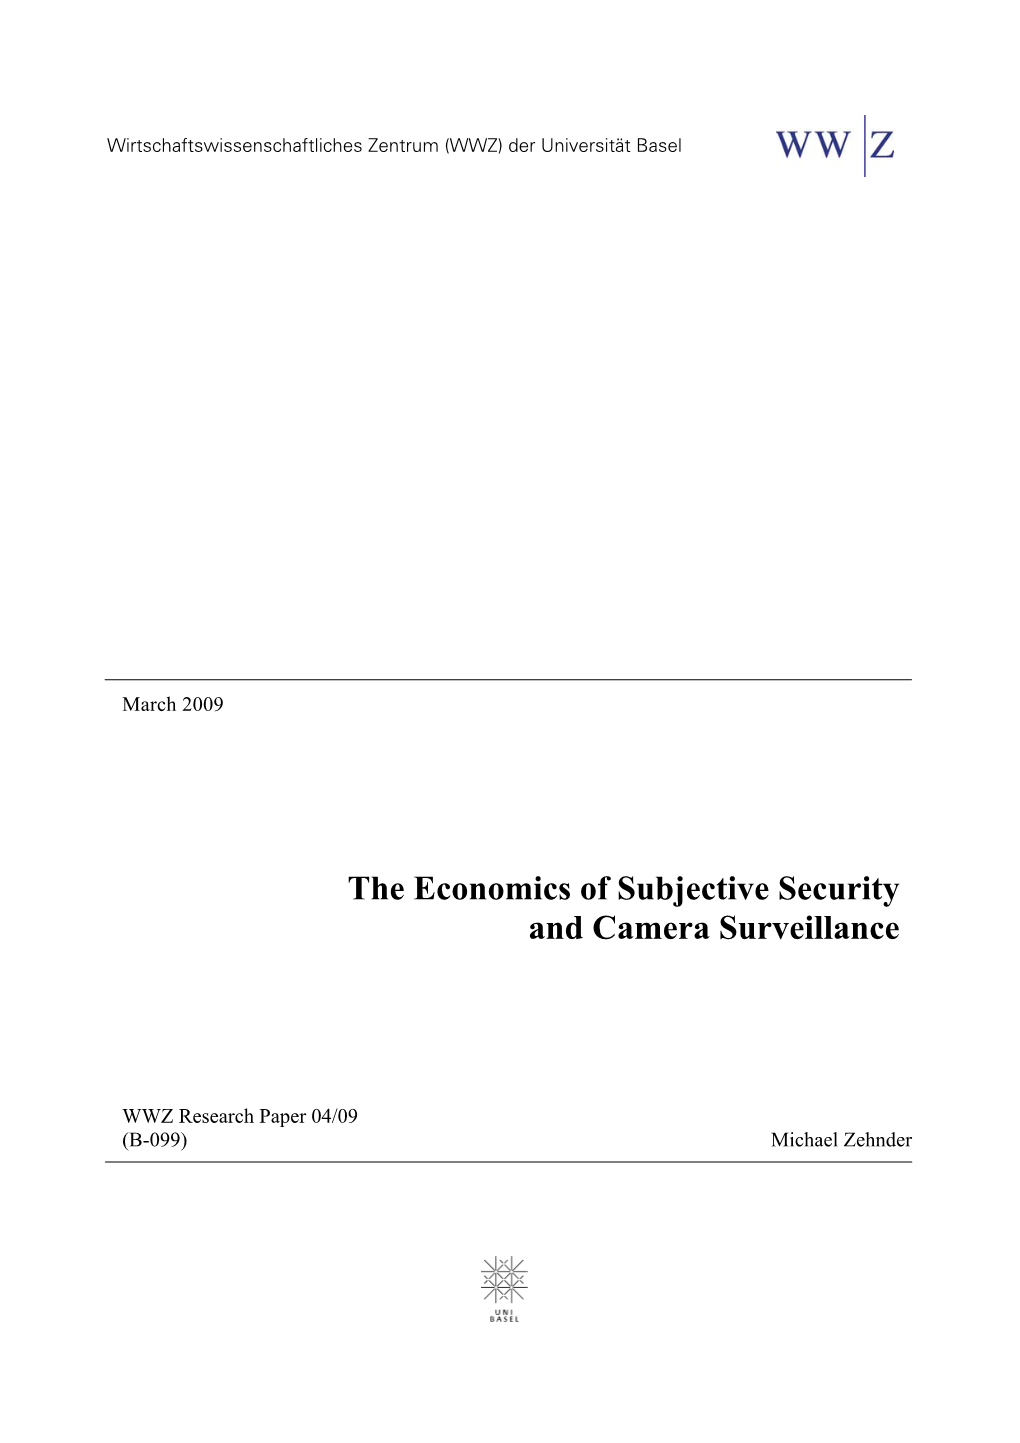 The Economics of Subjective Security and Camera Surveillance